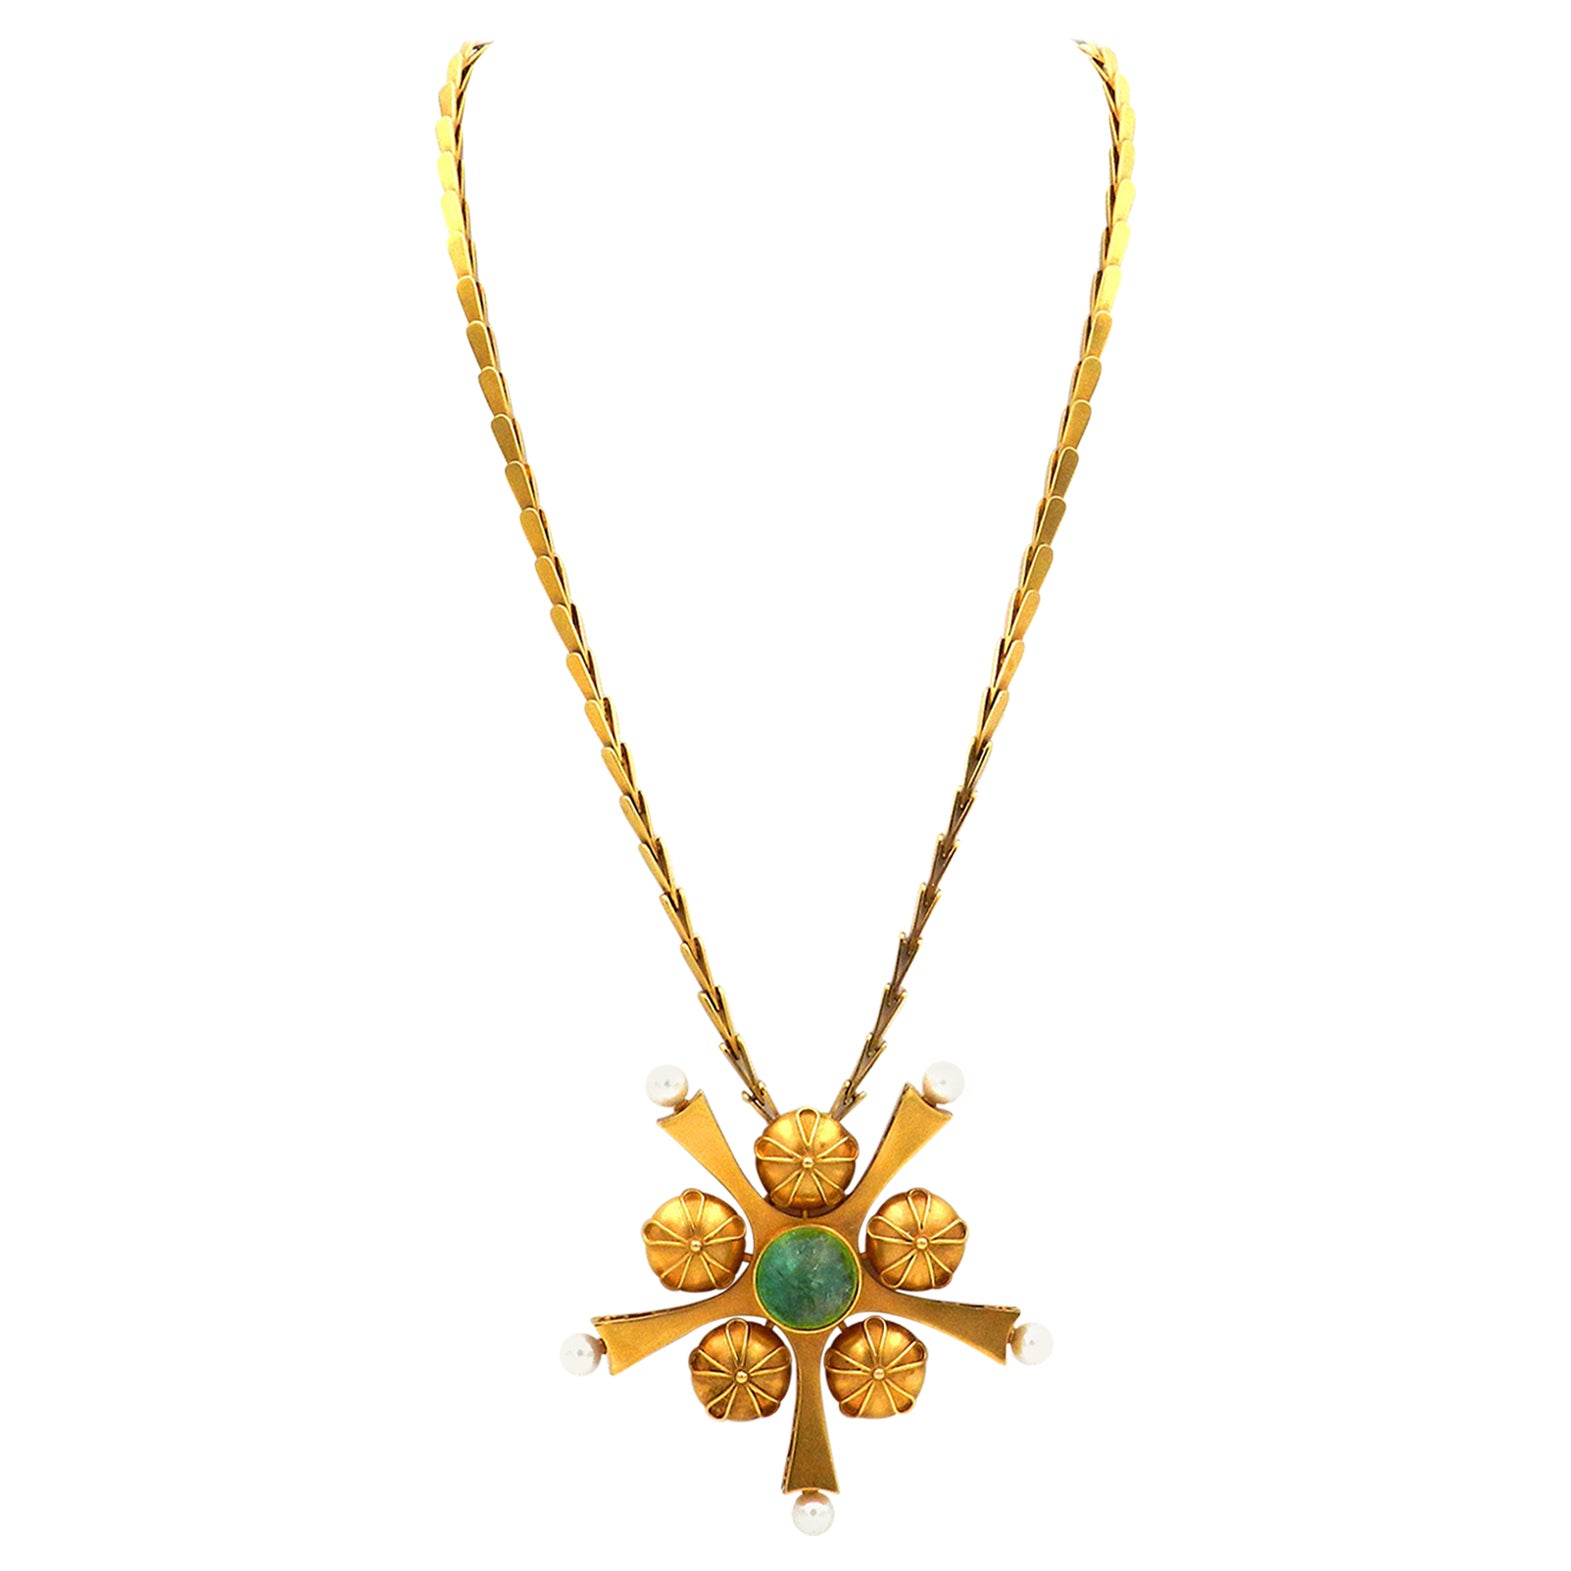 7 Carat Natural Emerald and Pearl 14K Yellow Gold Pendant Necklace